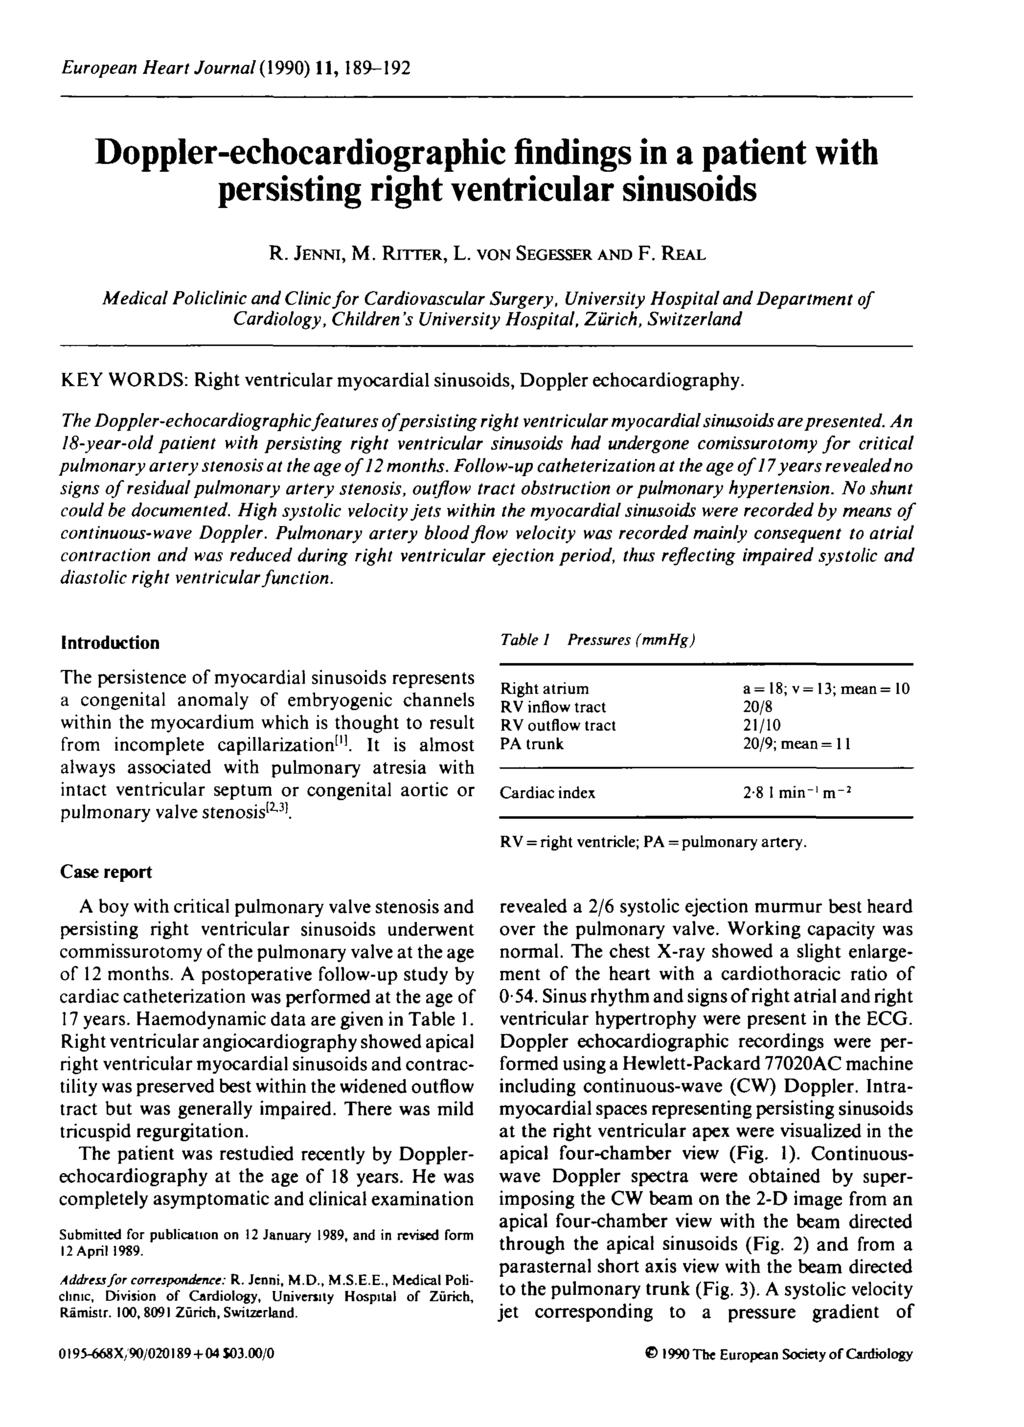 European Heart Journal (1990) 11,189-192 Doppler-echocardiographic findings in a patient with persisting right ventricular sinusoids R. JENNI, M. RITTER, L. VON SEGESSER AND F.